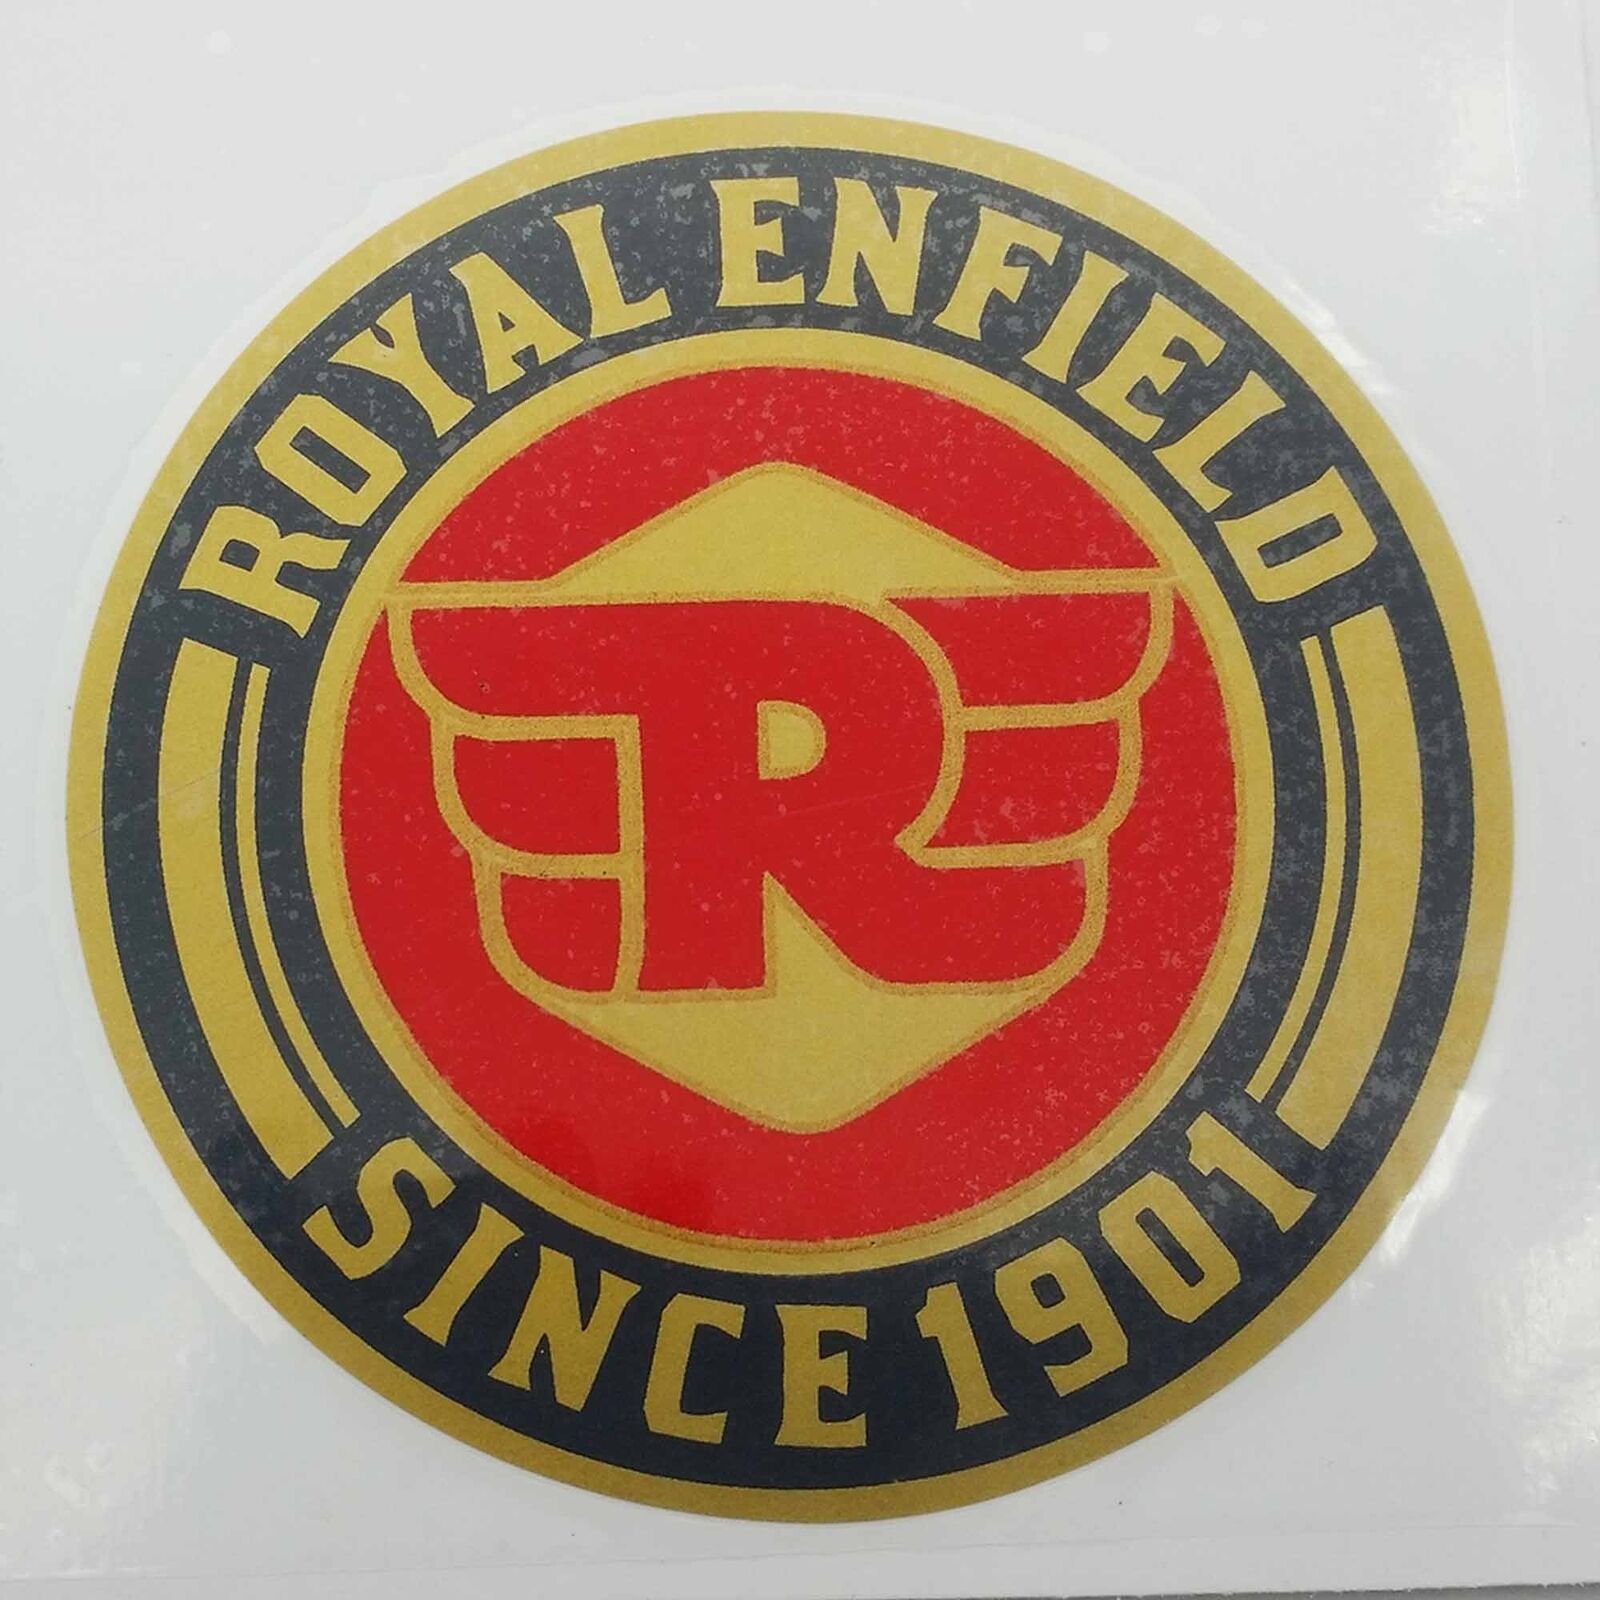 Royal Enfield crown stickers in custom colors and sizes